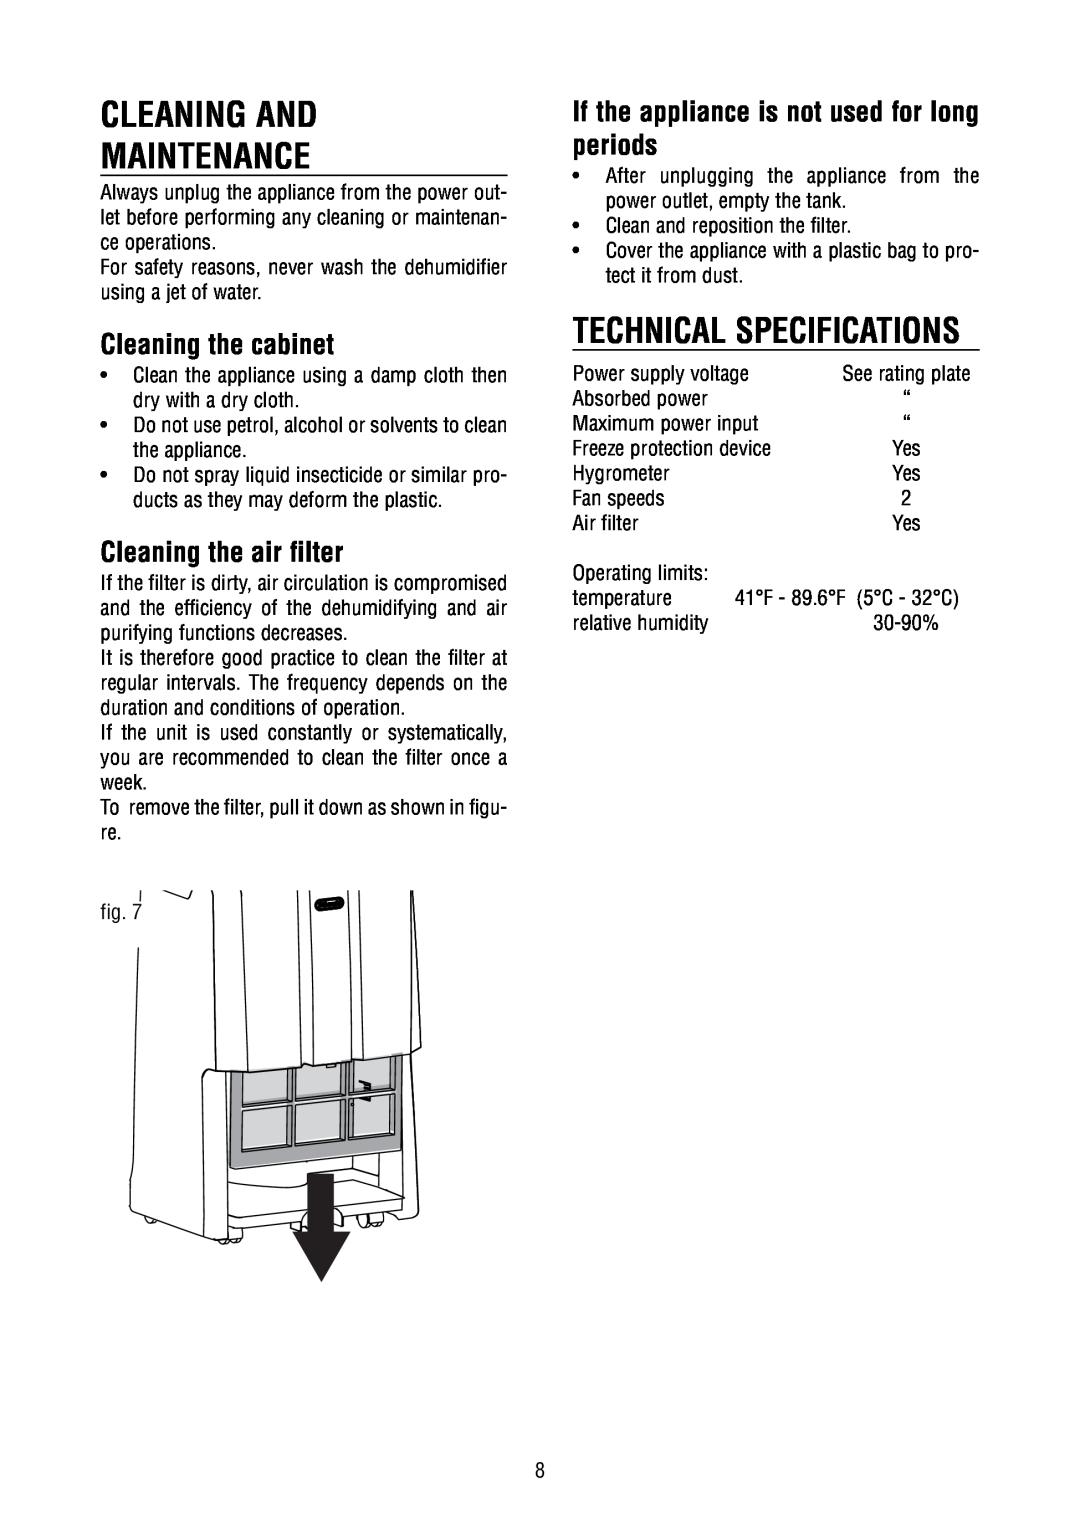 DeLonghi DD40P, DD45P Cleaning And Maintenance, Technical Specifications, Cleaning the cabinet, Cleaning the air filter 